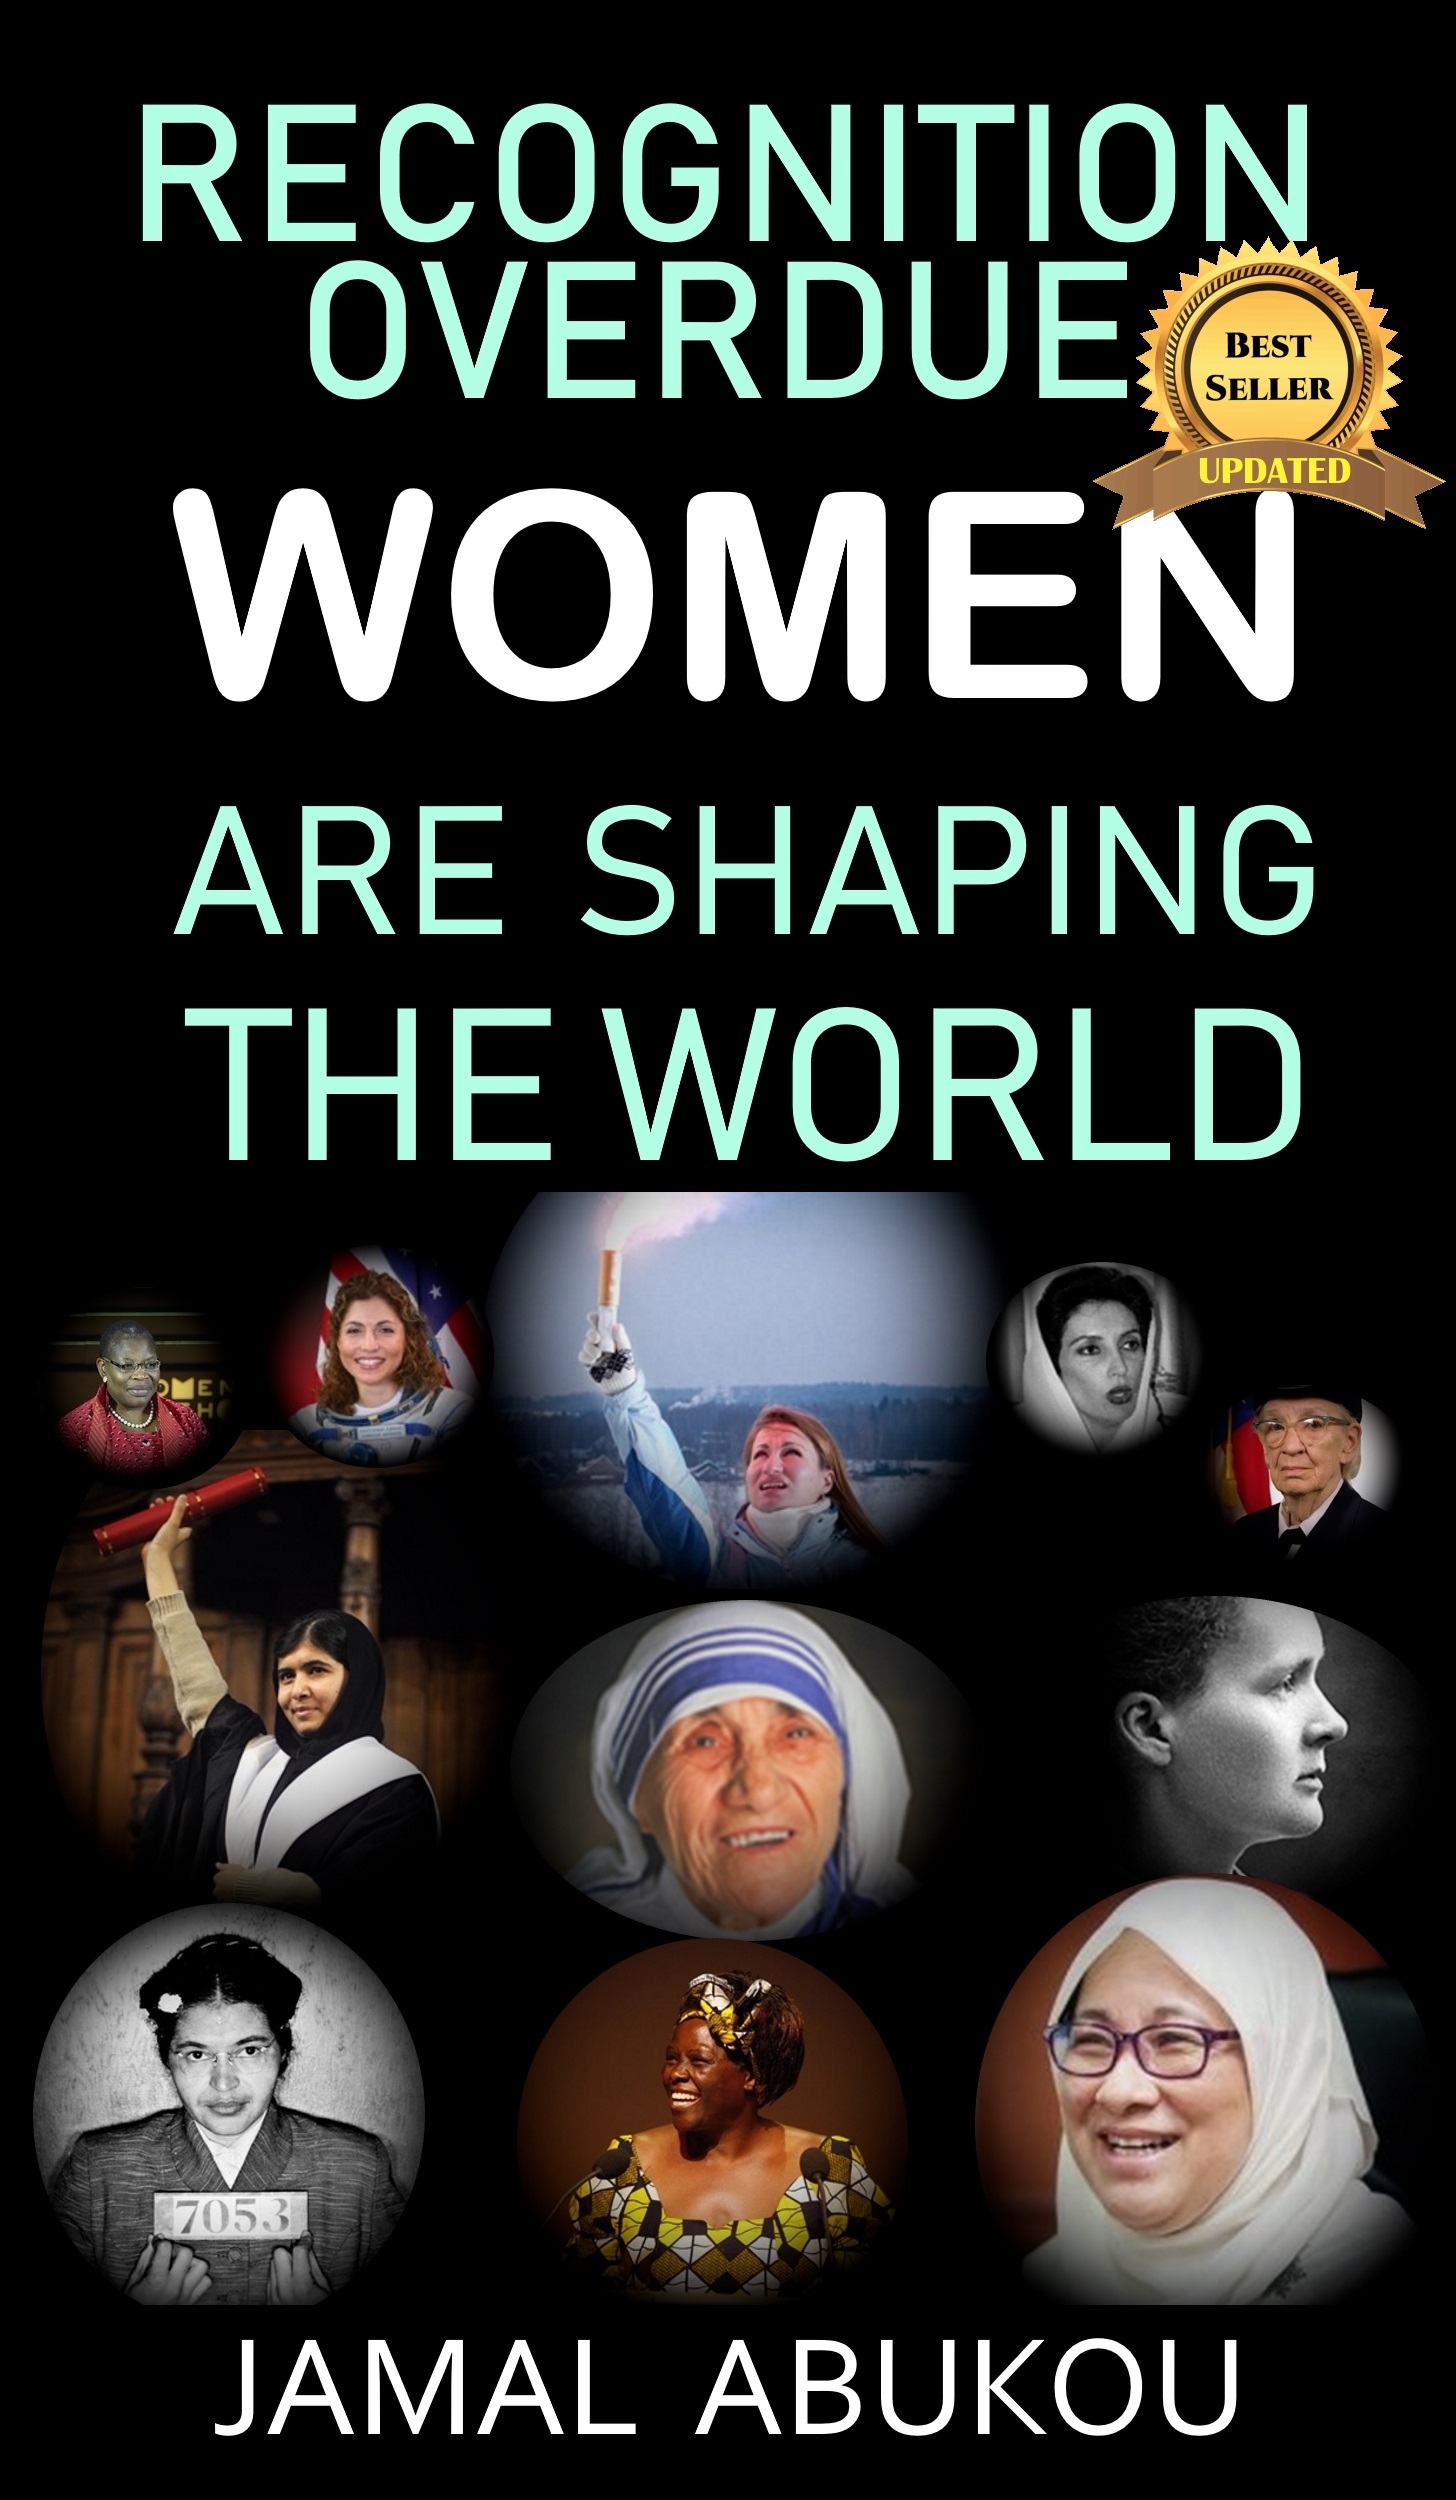 FREE: Women Are Shaping The World by Jamal Abukou